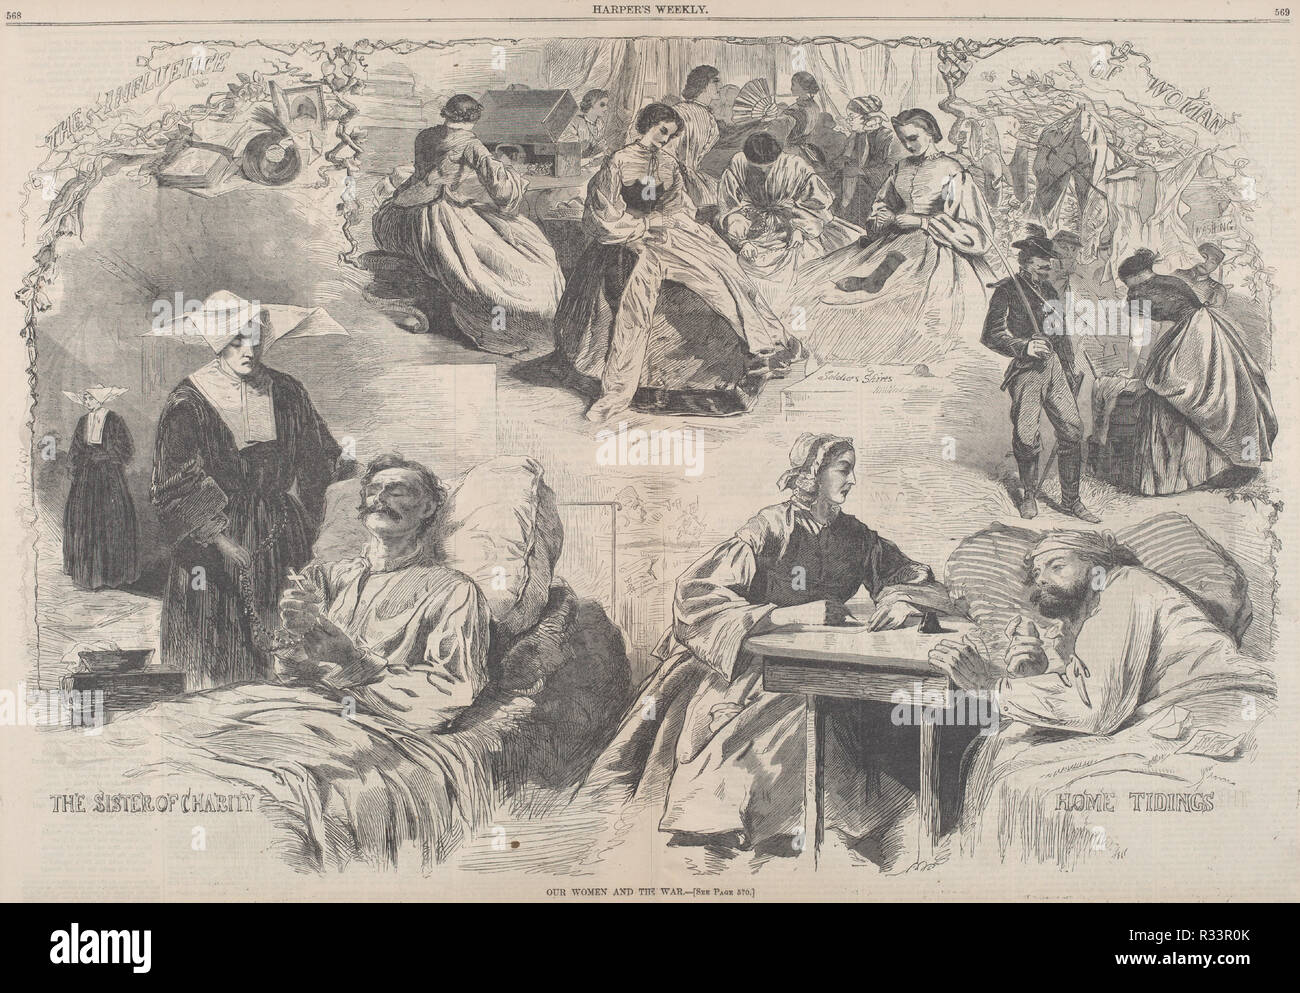 Our Women and the War. Dated: published 1862. Dimensions: image: 34.2 x 51.6 cm (13 7/16 x 20 5/16 in.)  sheet: 40.1 x 56.6 cm (15 13/16 x 22 5/16 in.). Medium: wood engraving on newsprint. Museum: National Gallery of Art, Washington DC. Author: after Winslow Homer. Stock Photo